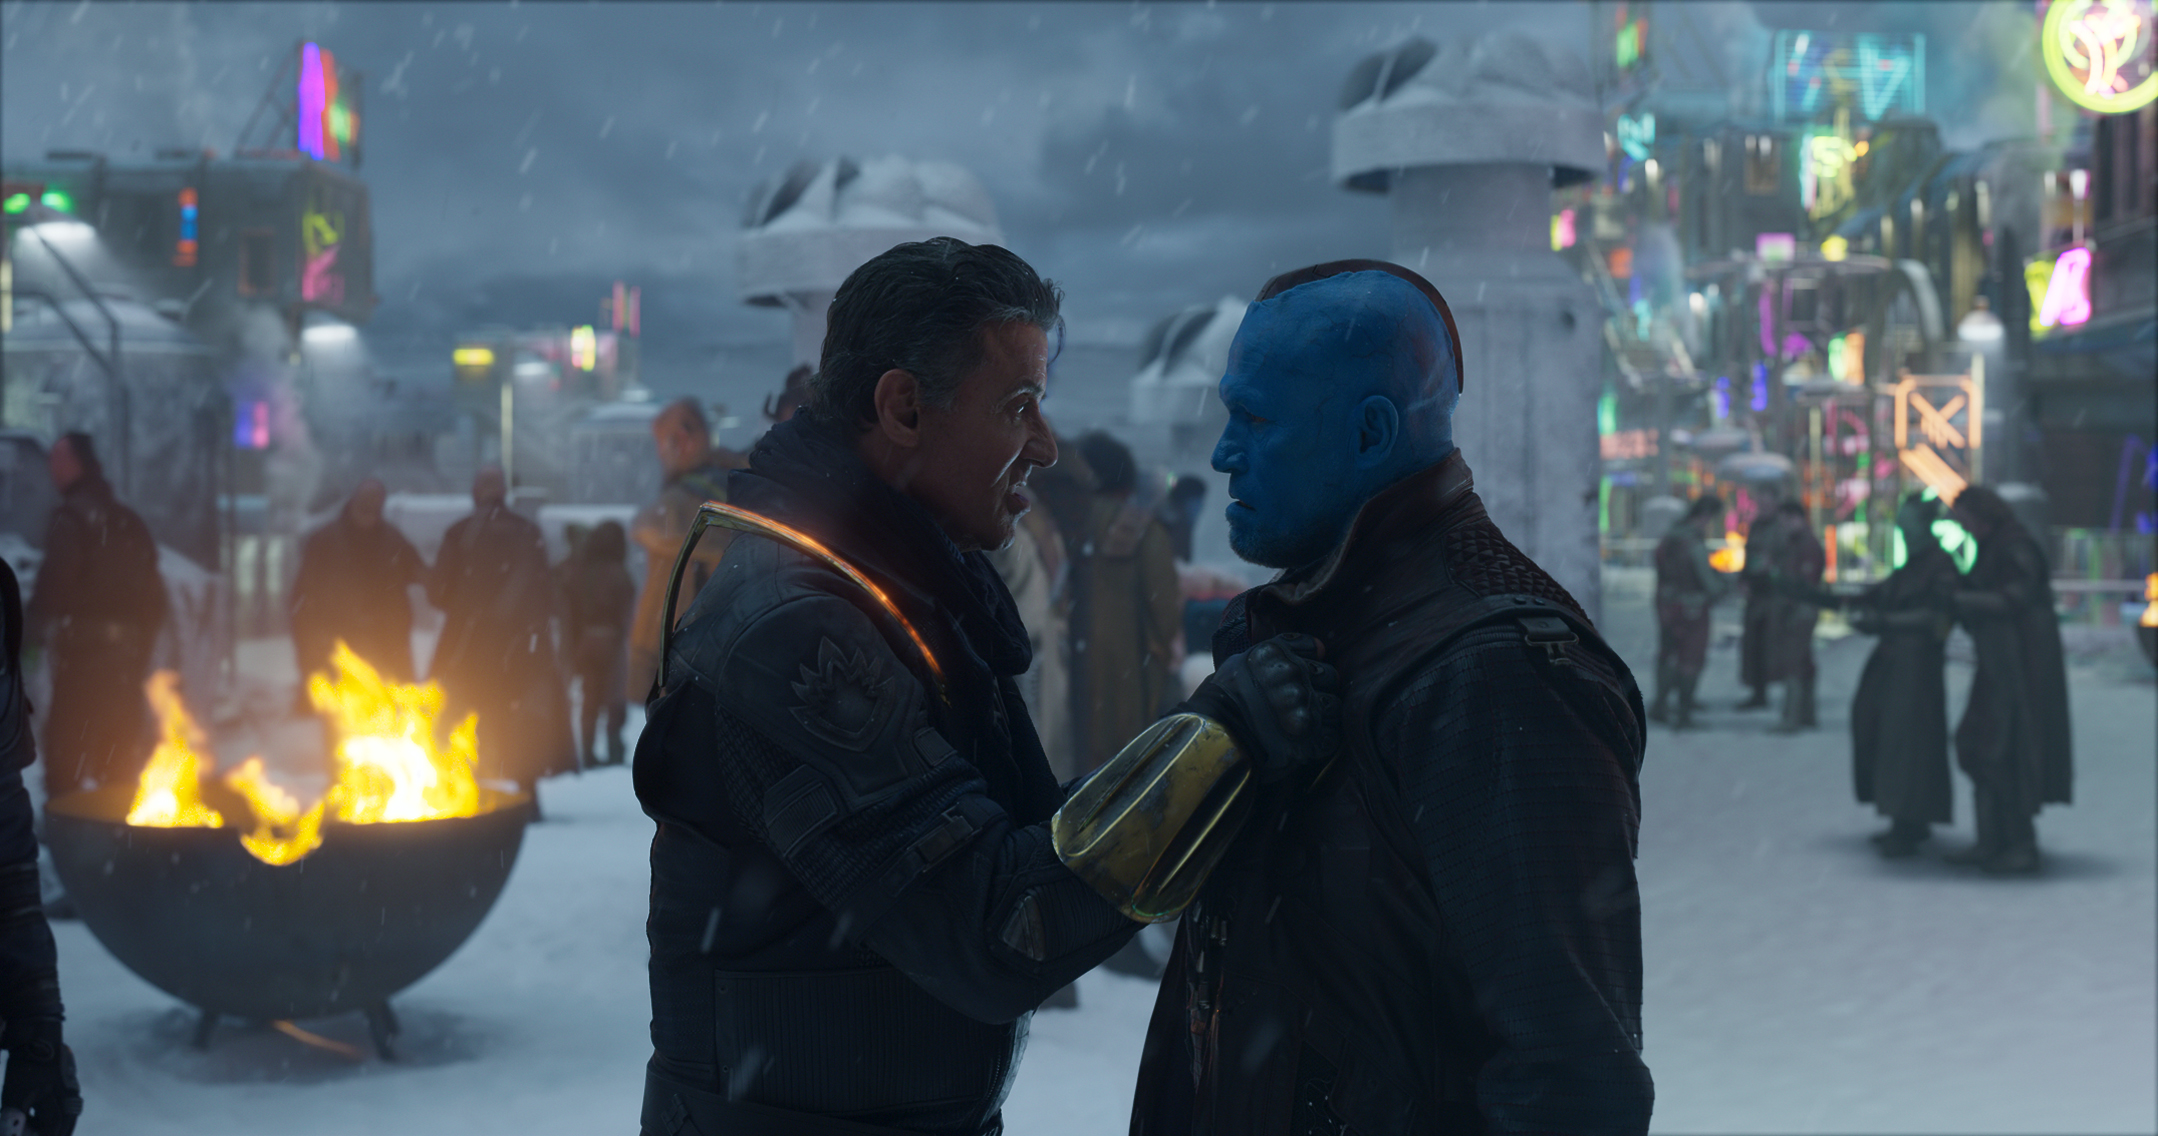 movie, guardians of the galaxy vol 2, michael rooker, sylvester stallone, yondu udonta